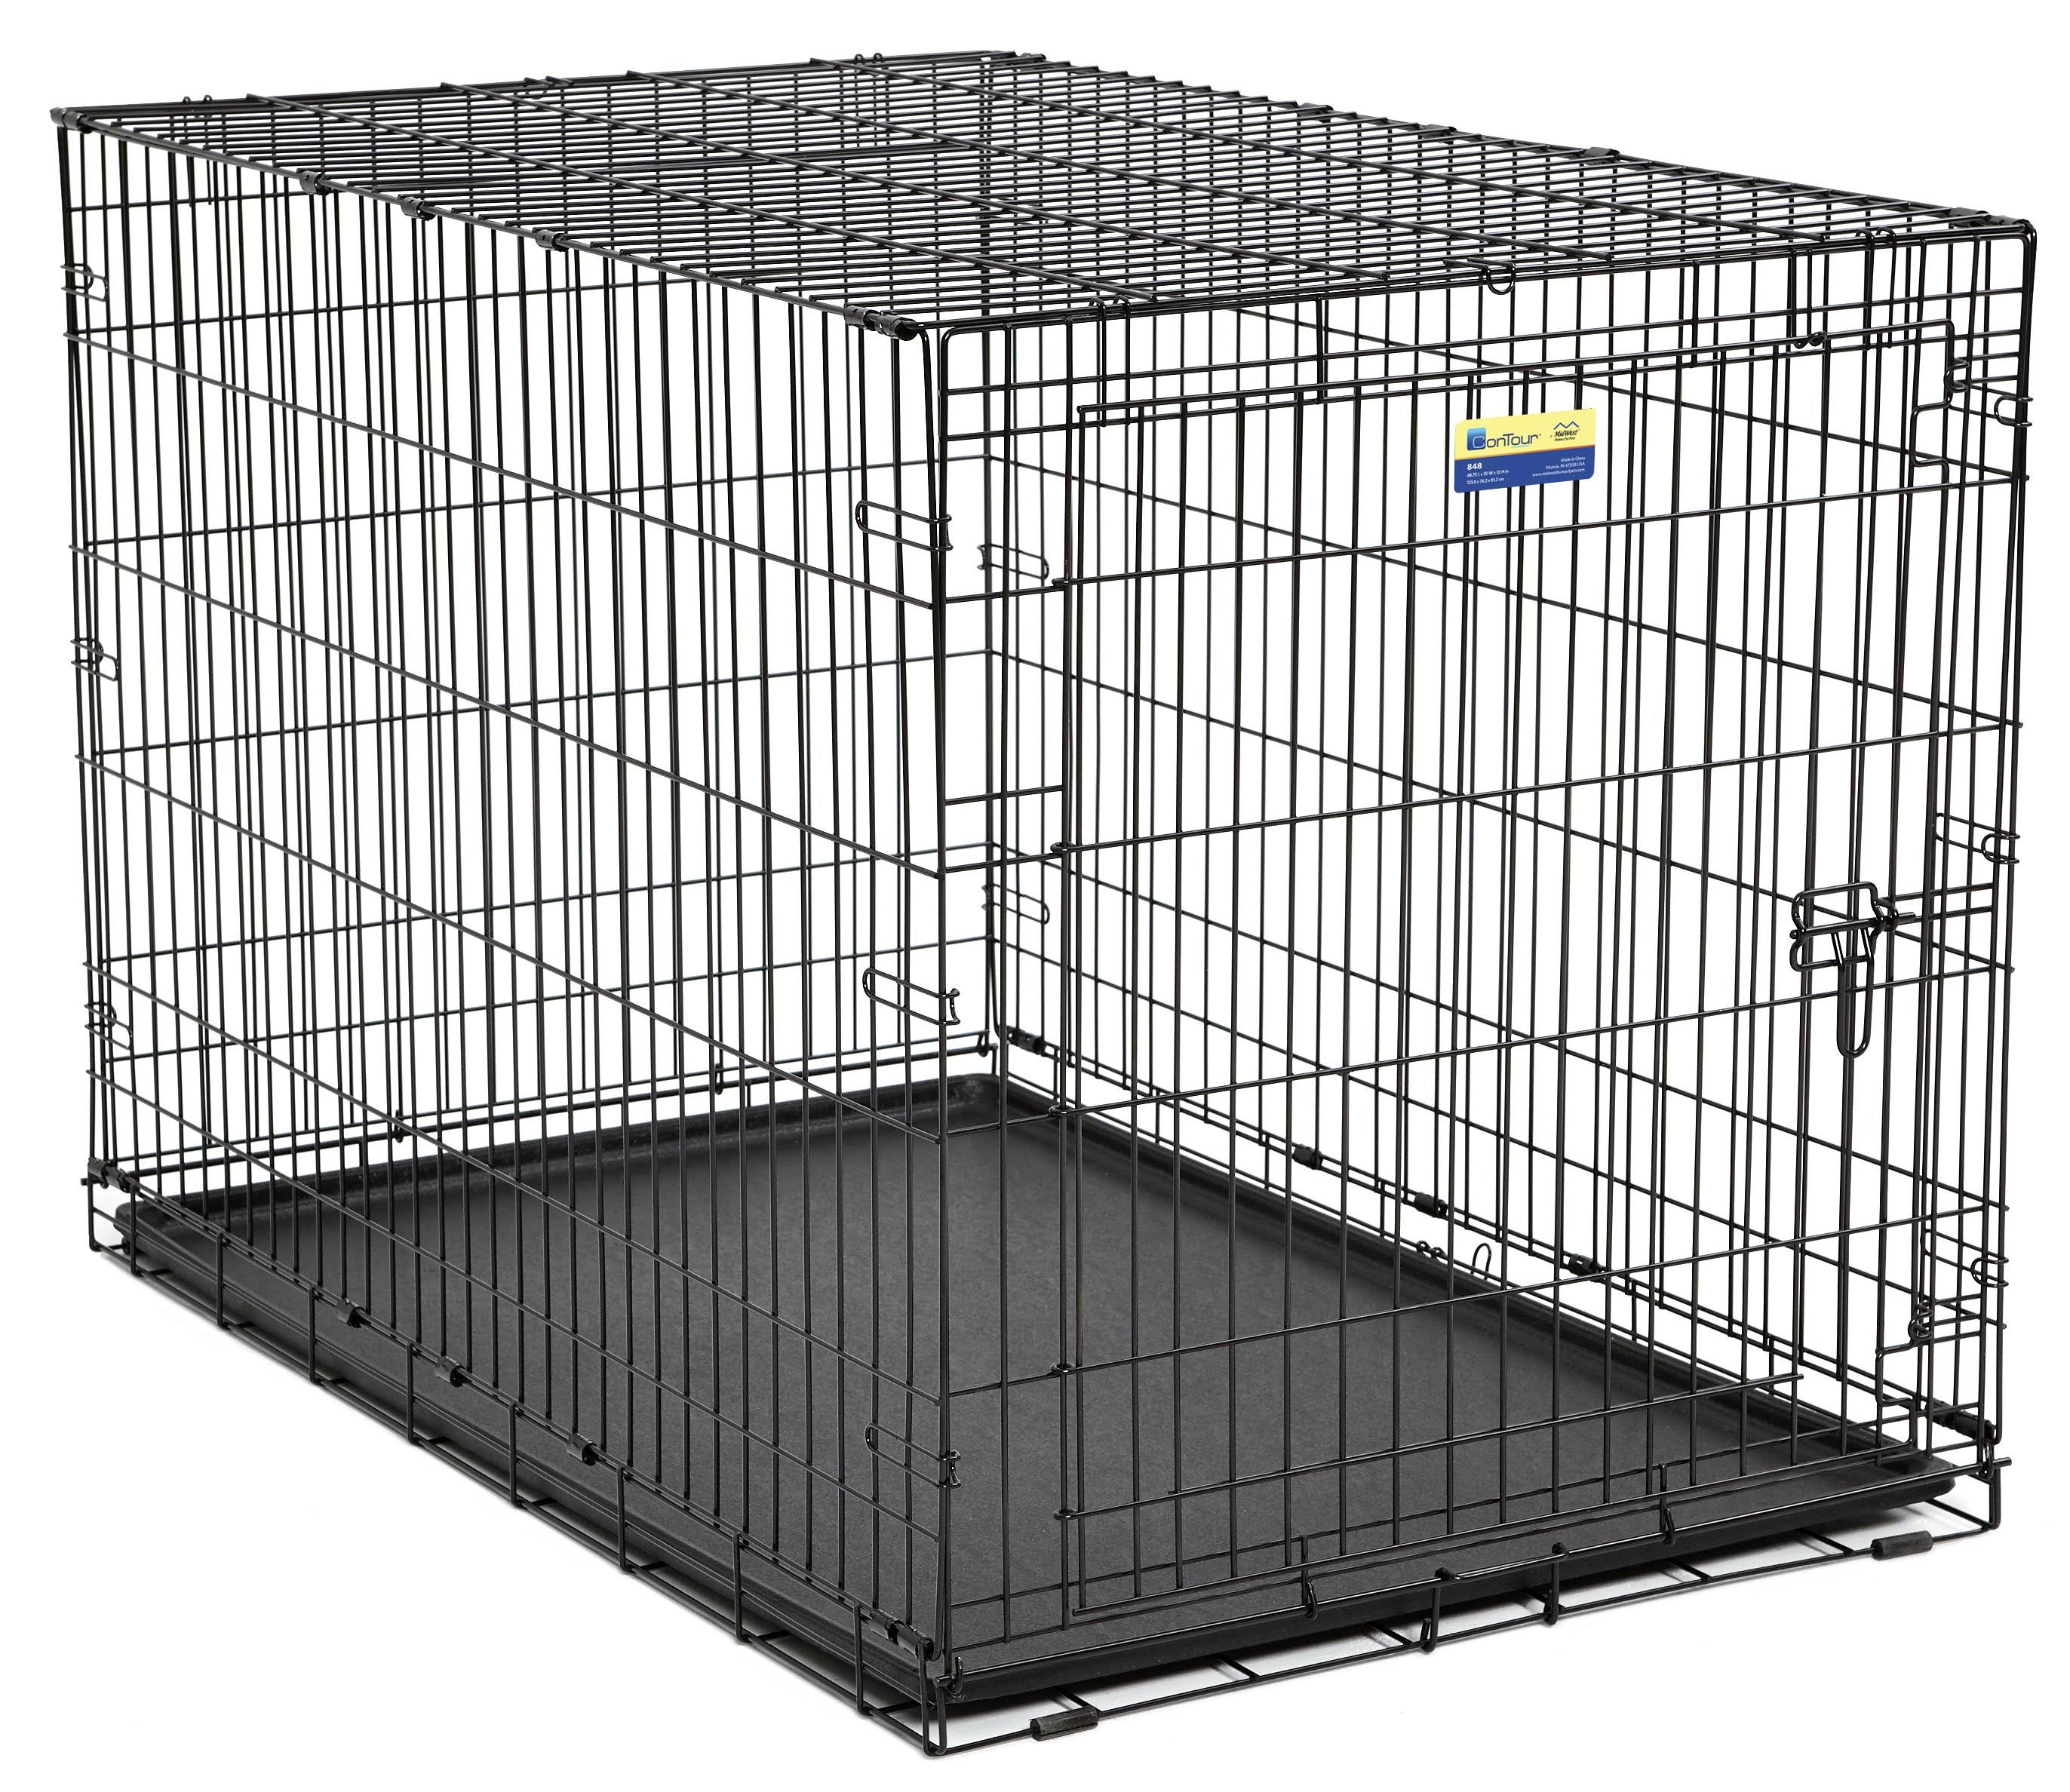 Contour Single Door Dog Crate , Partno 818, by Midwest Container, Size 18X12X14, | Midwest Homes For Pets Dog Crates | Free Shipping On All Orders